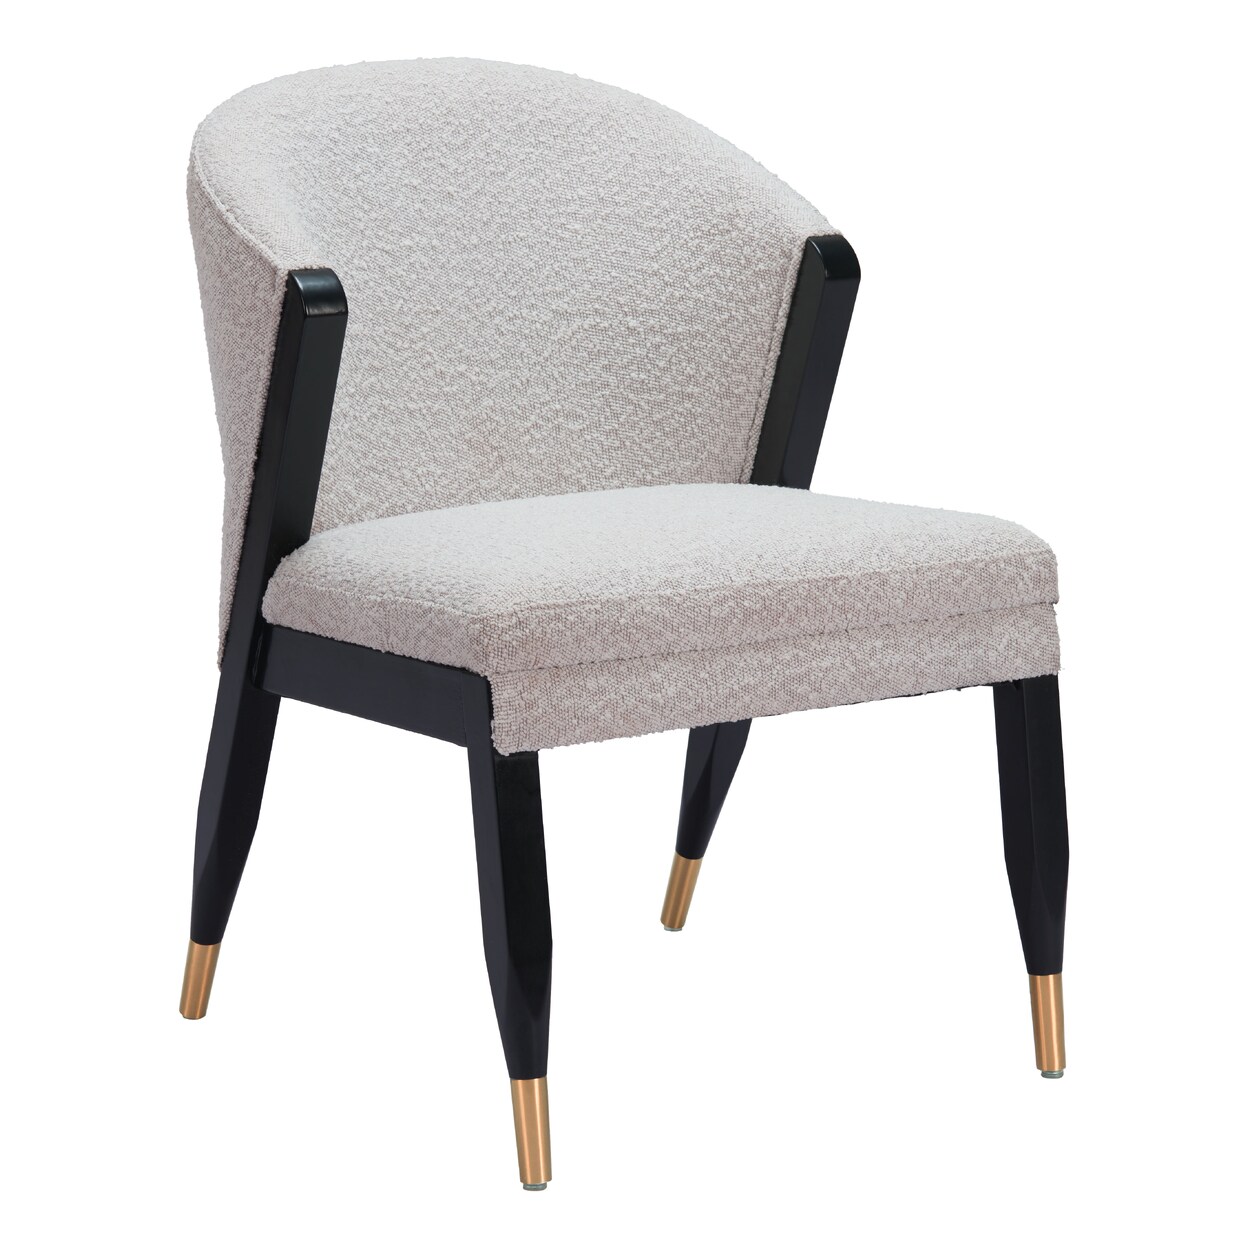 Zuo Modern Contemporary Inc. Pula Dining Chair Misty Gray